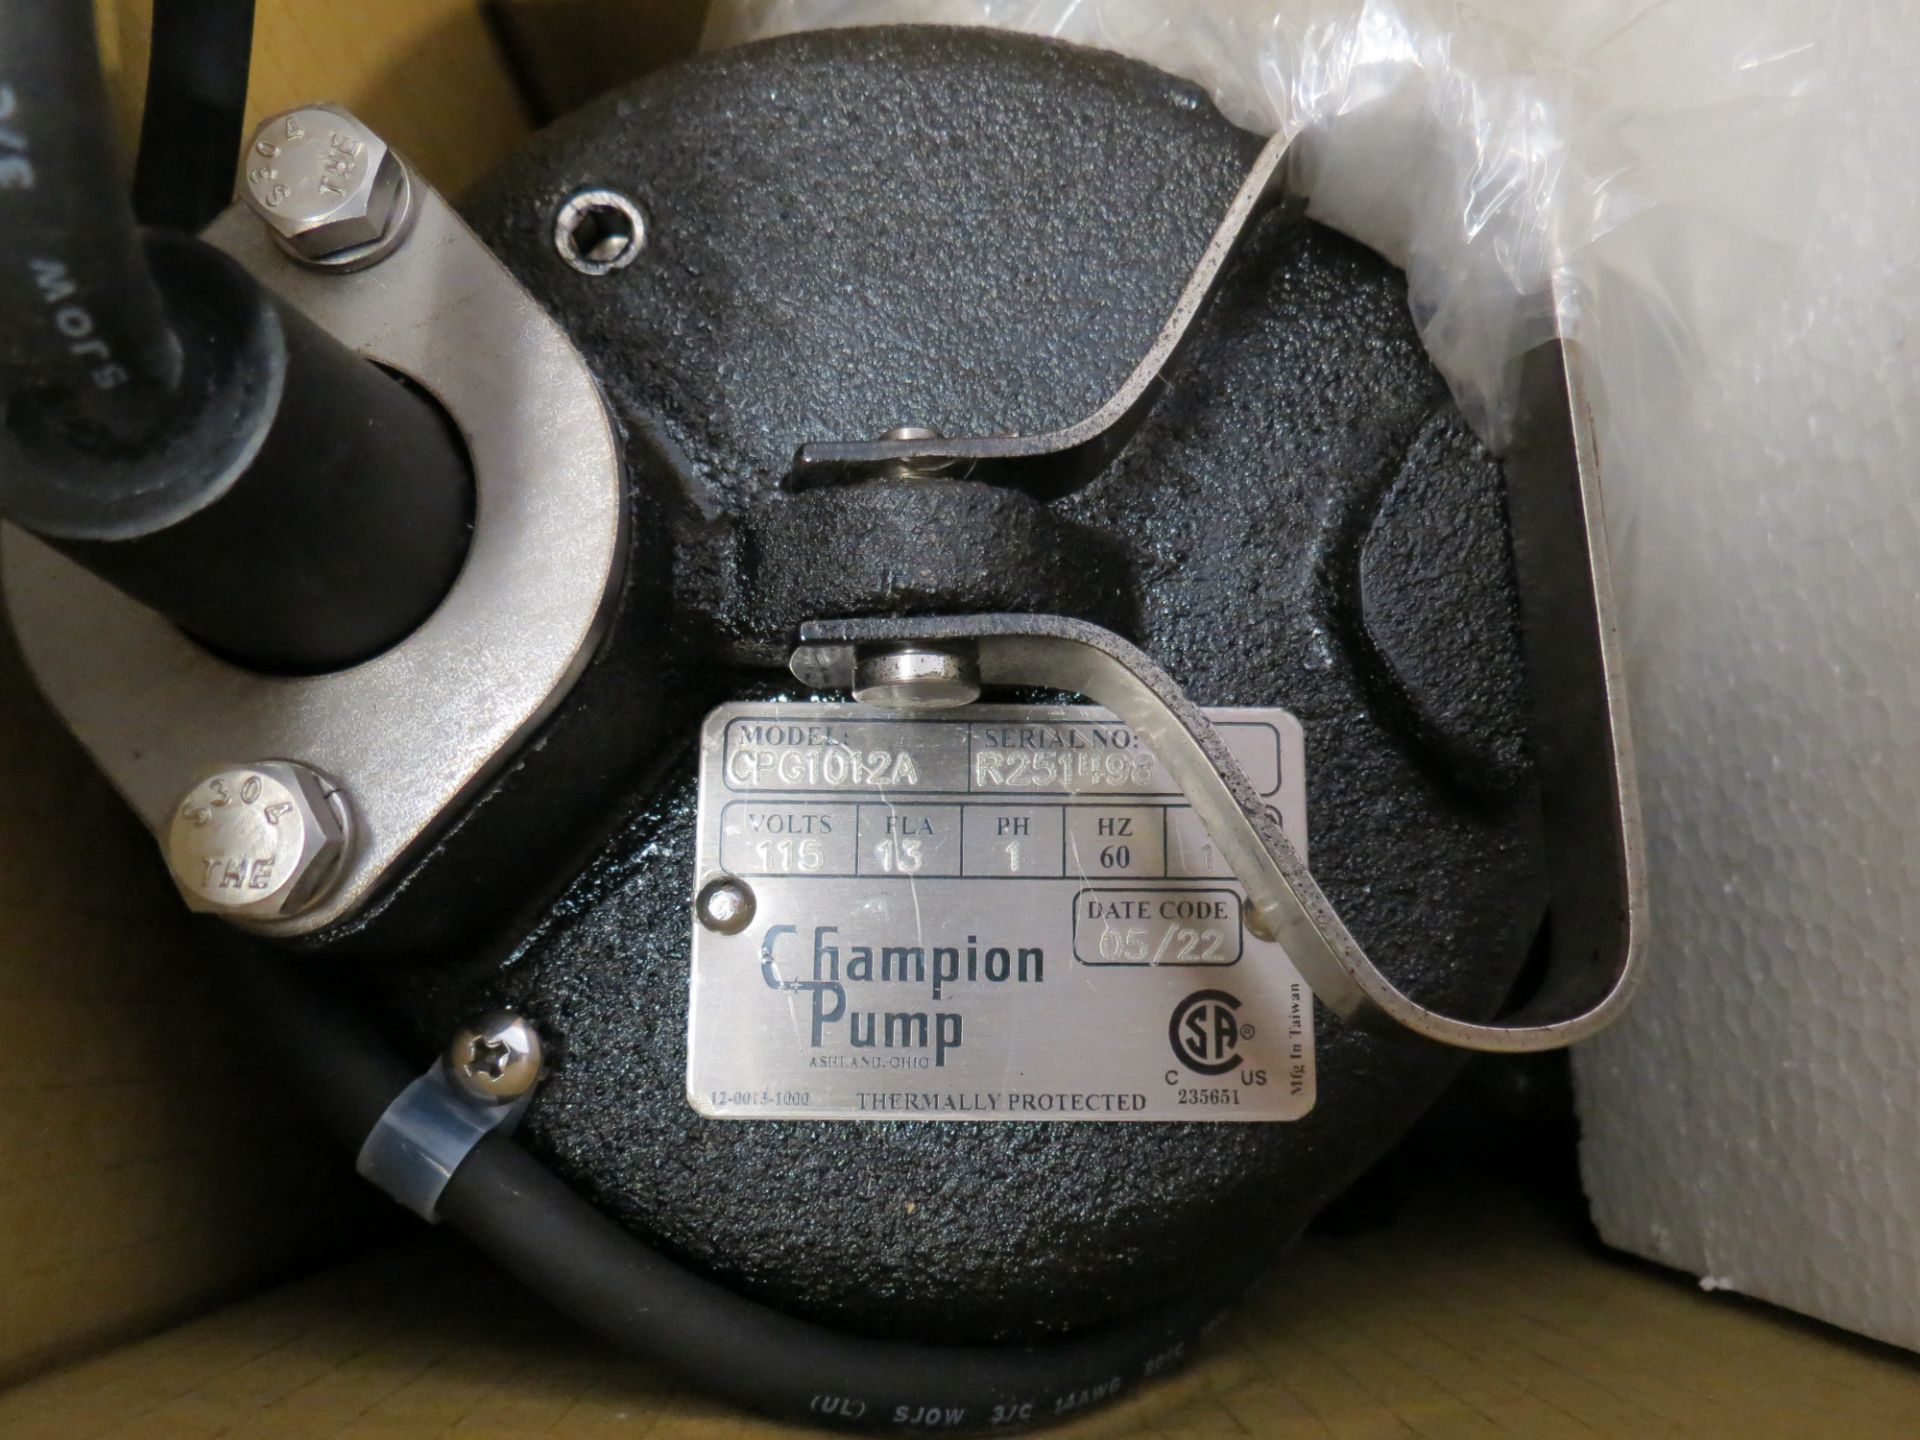 Champion Model CPG1012A 1HP, SN: R251498 Grinder Pump - Image 3 of 4